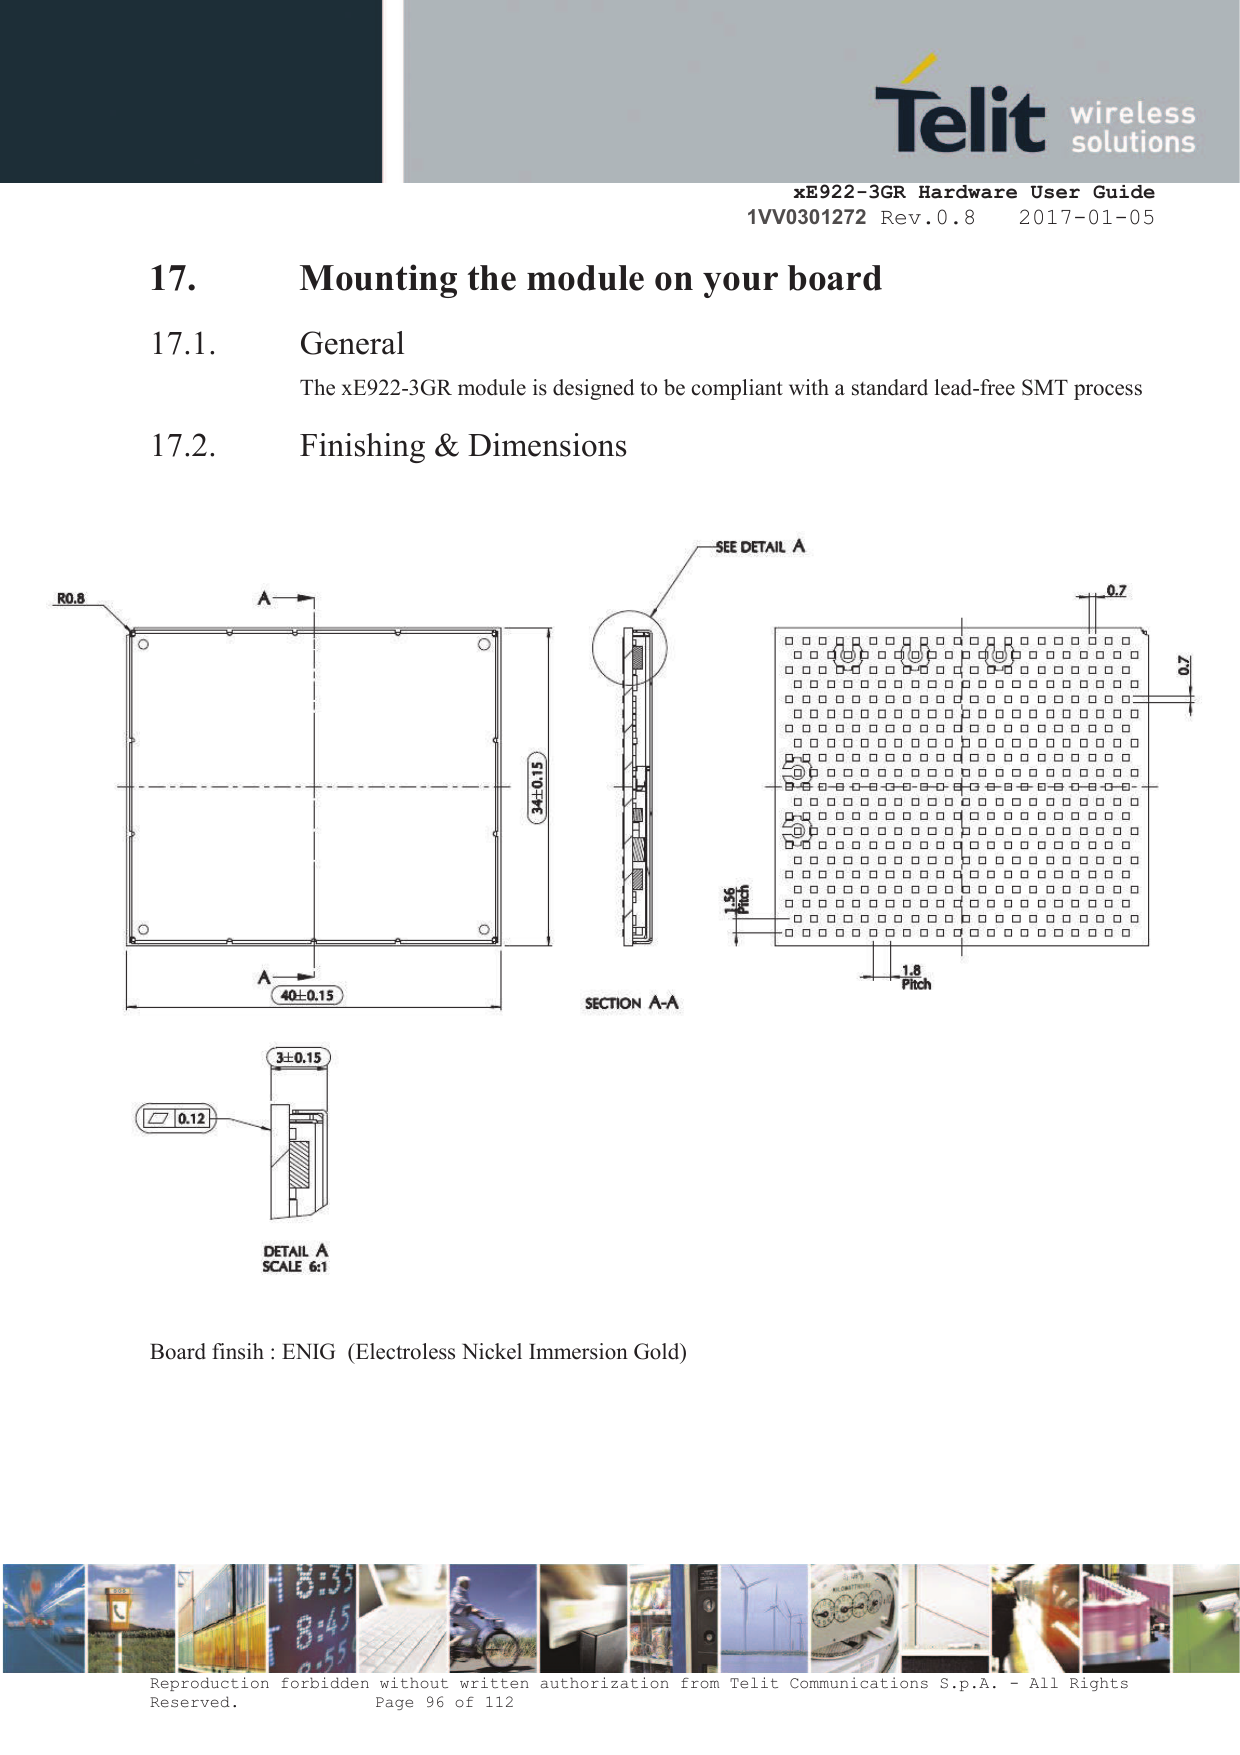     xE922-3GR Hardware User Guide 1VV0301272 Rev.0.8   2017-01-05 Reproduction forbidden without written authorization from Telit Communications S.p.A. - All Rights Reserved.    Page 96 of 112  17. Mounting the module on your board 17.1. General The xE922-3GR module is designed to be compliant with a standard lead-free SMT process 17.2. Finishing &amp; Dimensions     Board finsih : ENIG  (Electroless Nickel Immersion Gold)      